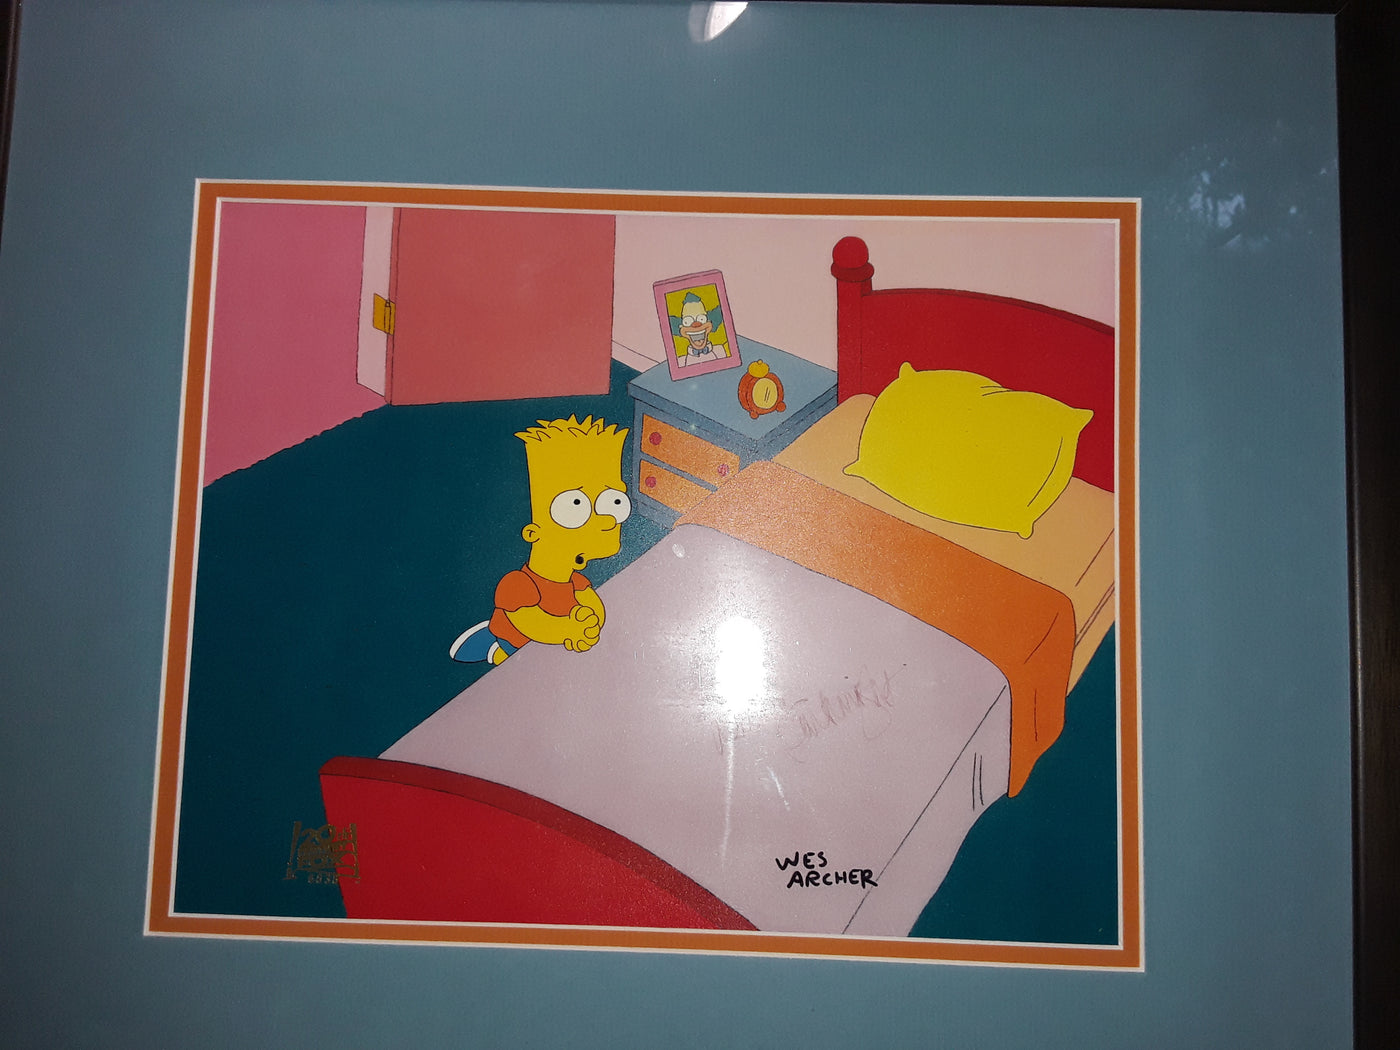 Original Simpsons Production Cel of Bart Simpson, Signed by Wes Archer and Nancy Cartwright